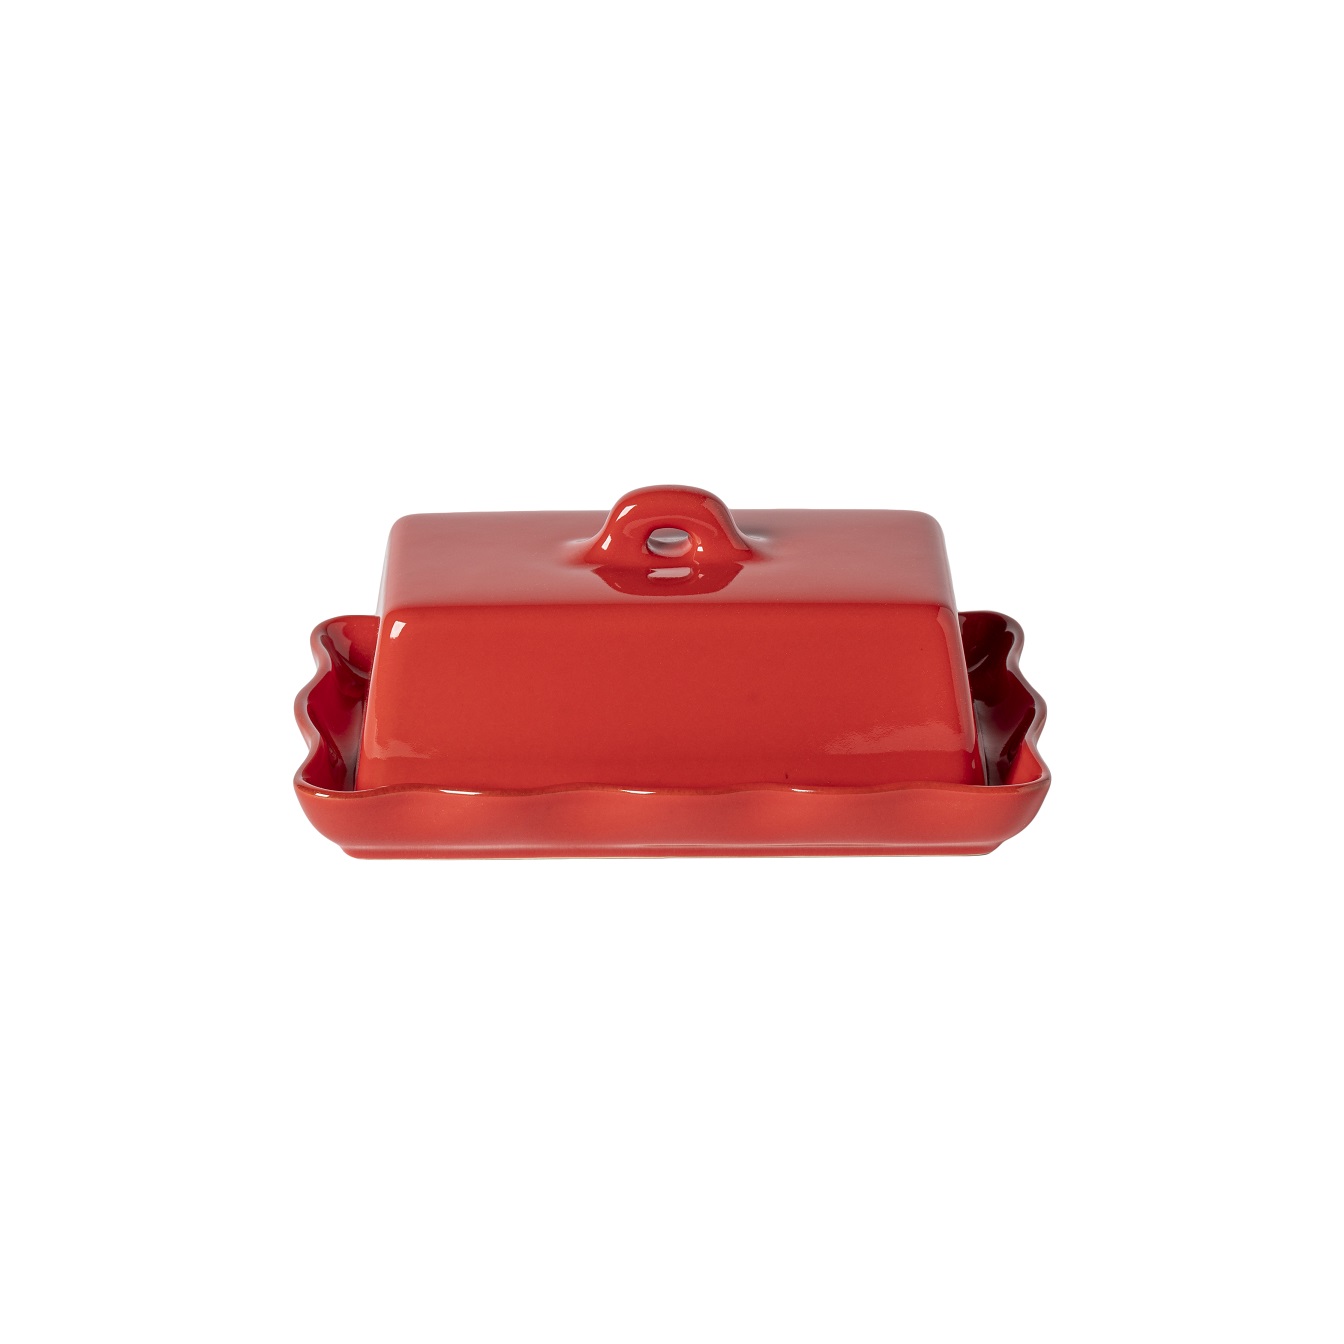 Cook & Host Red Rect Butter Dish 19cm With Lid Gift